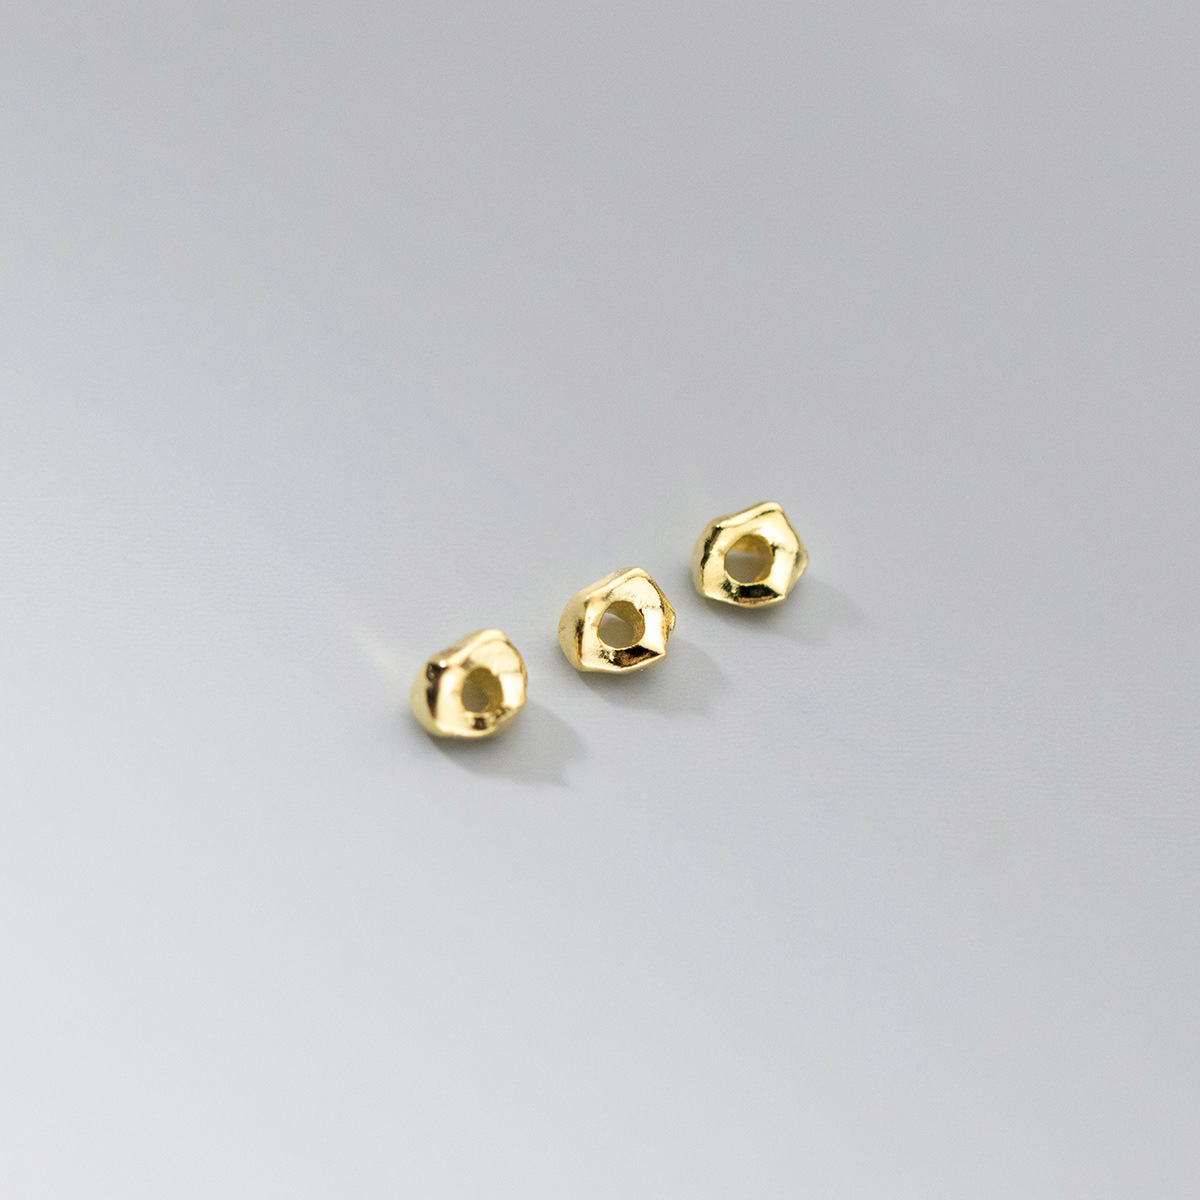 Electroplated gold 3mm